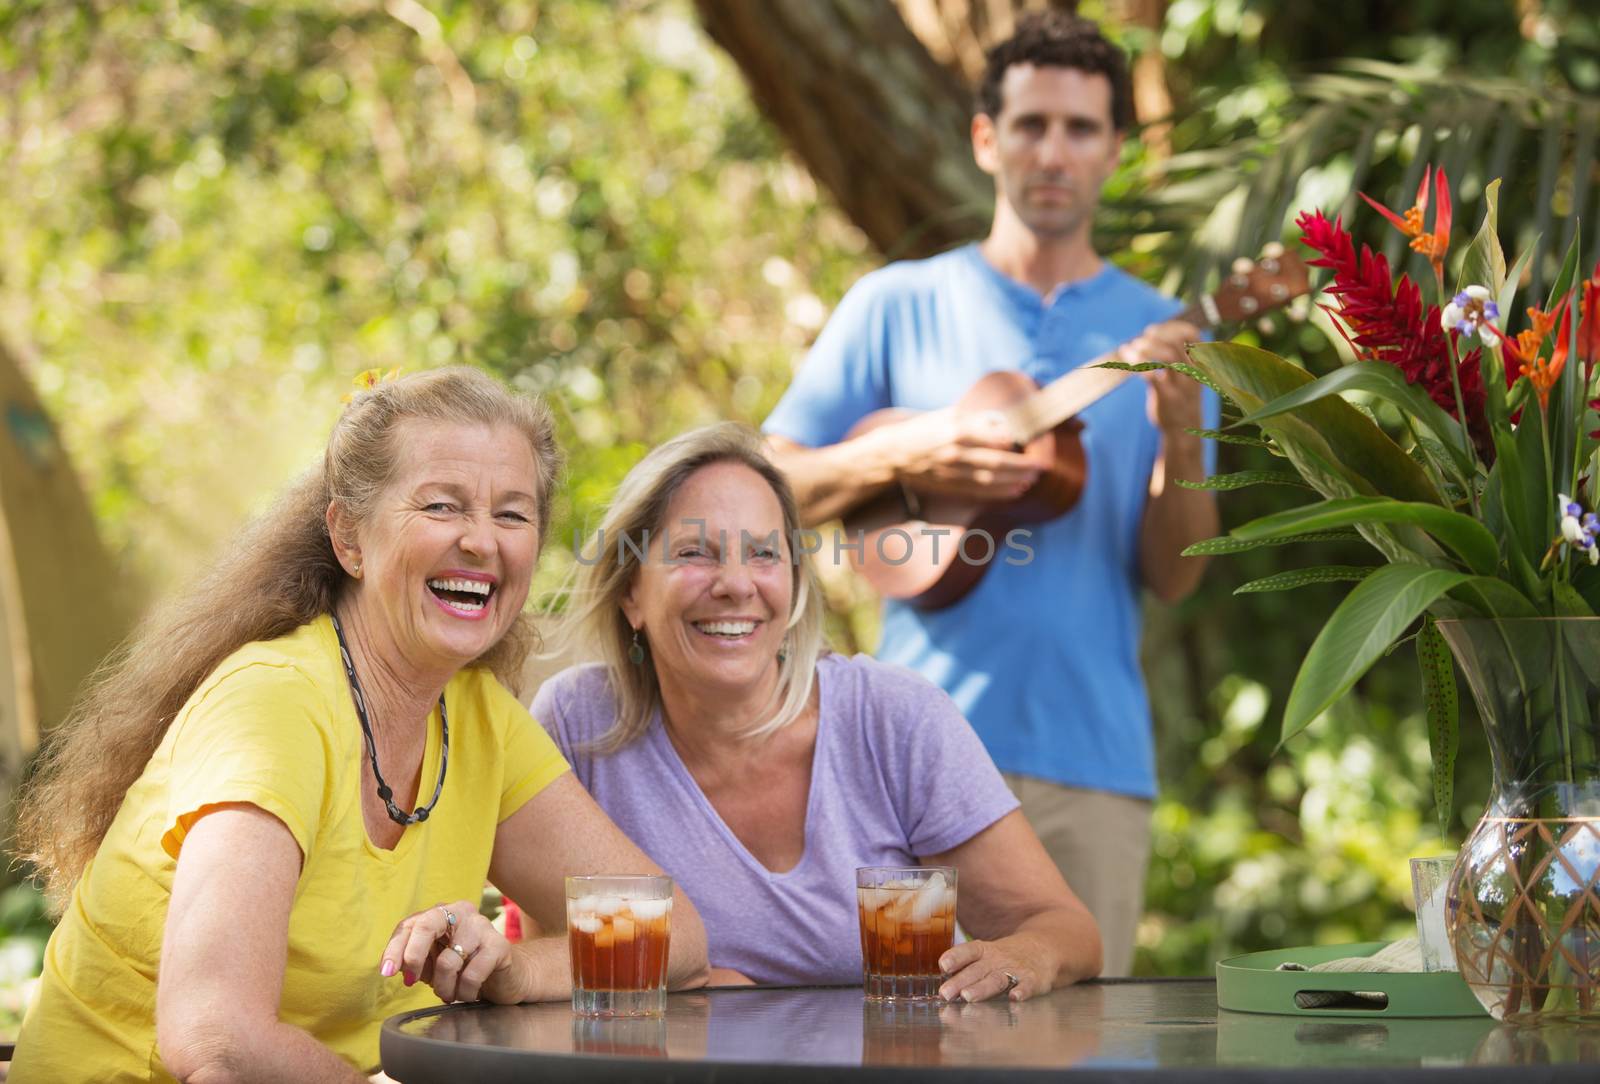 Two laughing women with ukelele player behind them